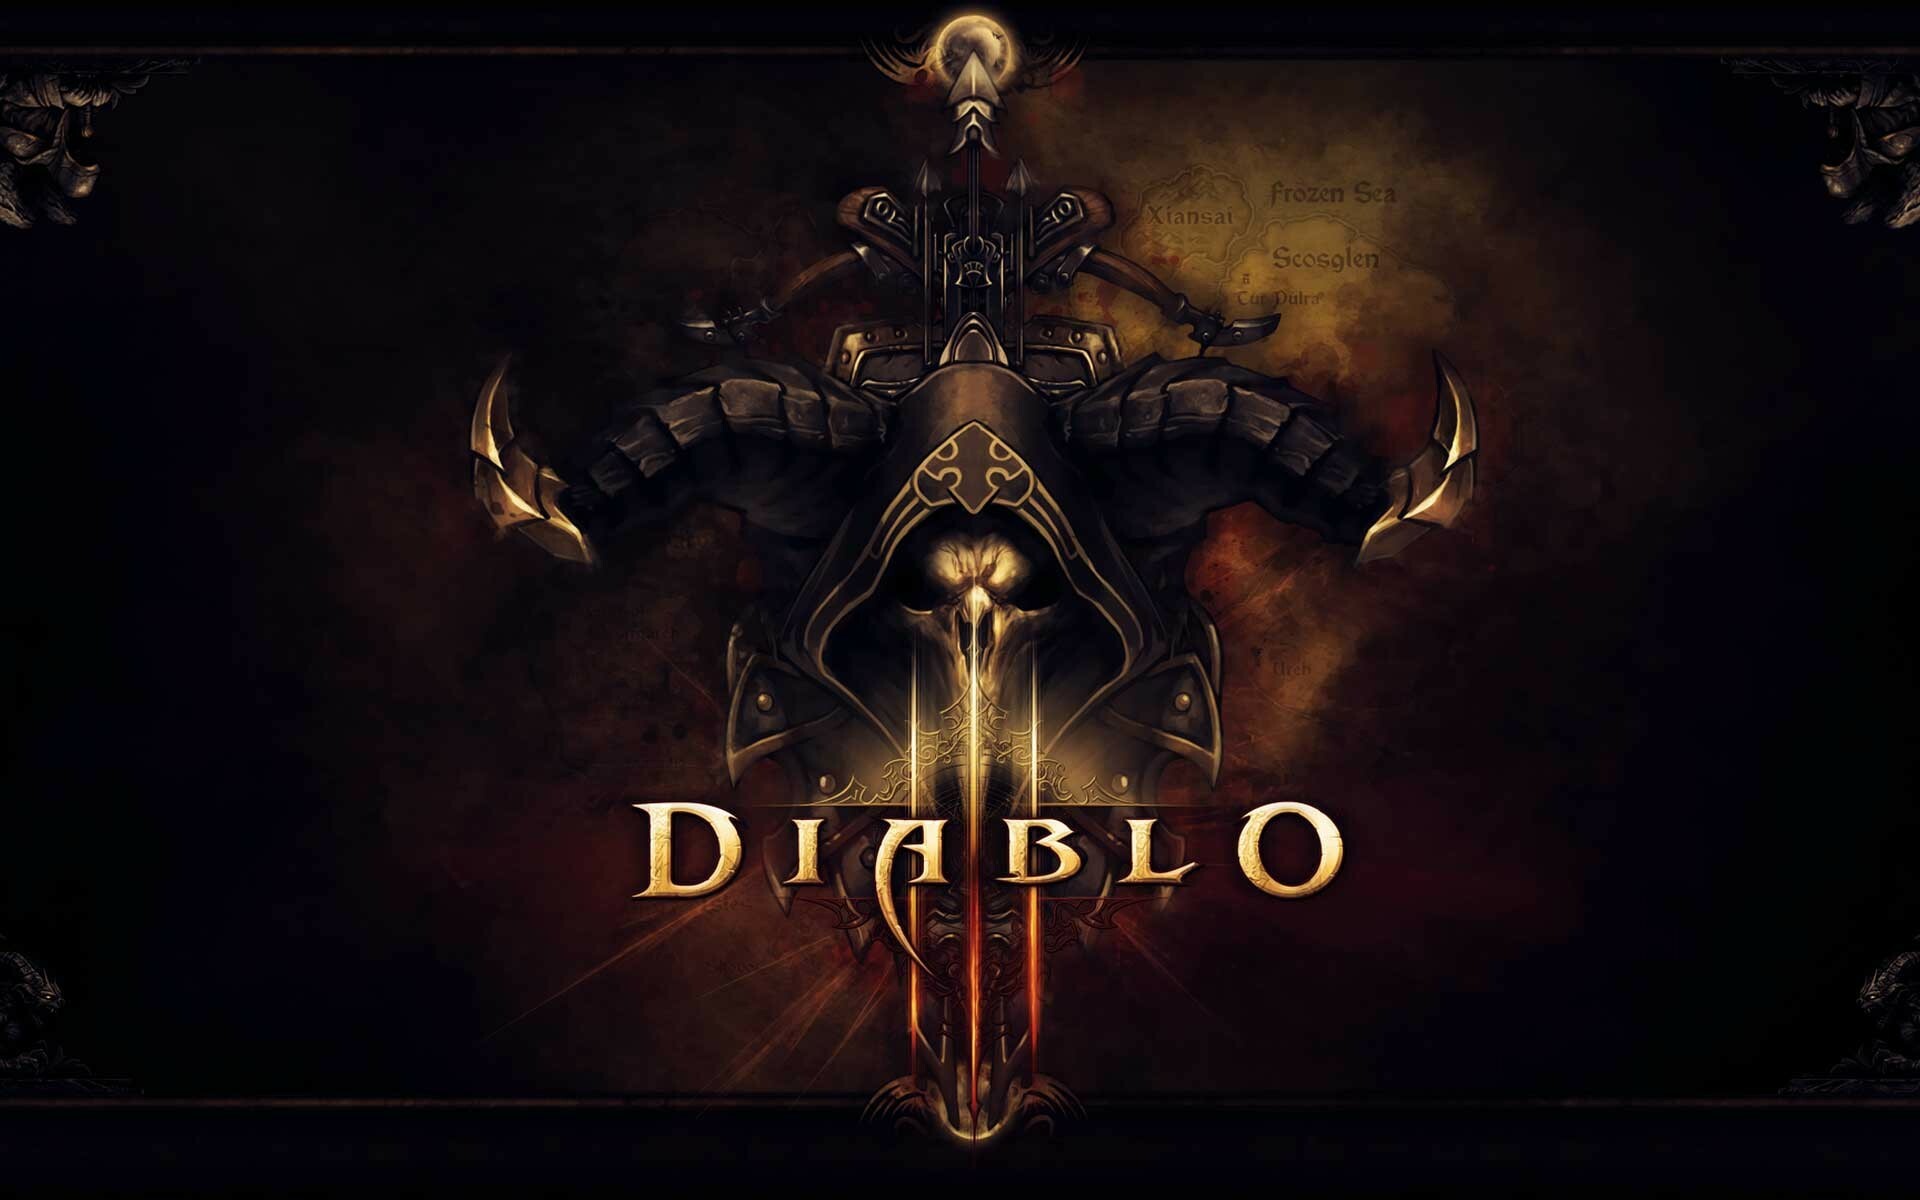 Diablo: One of the most well-known examples of the action-RPG subgenre. 1920x1200 HD Wallpaper.